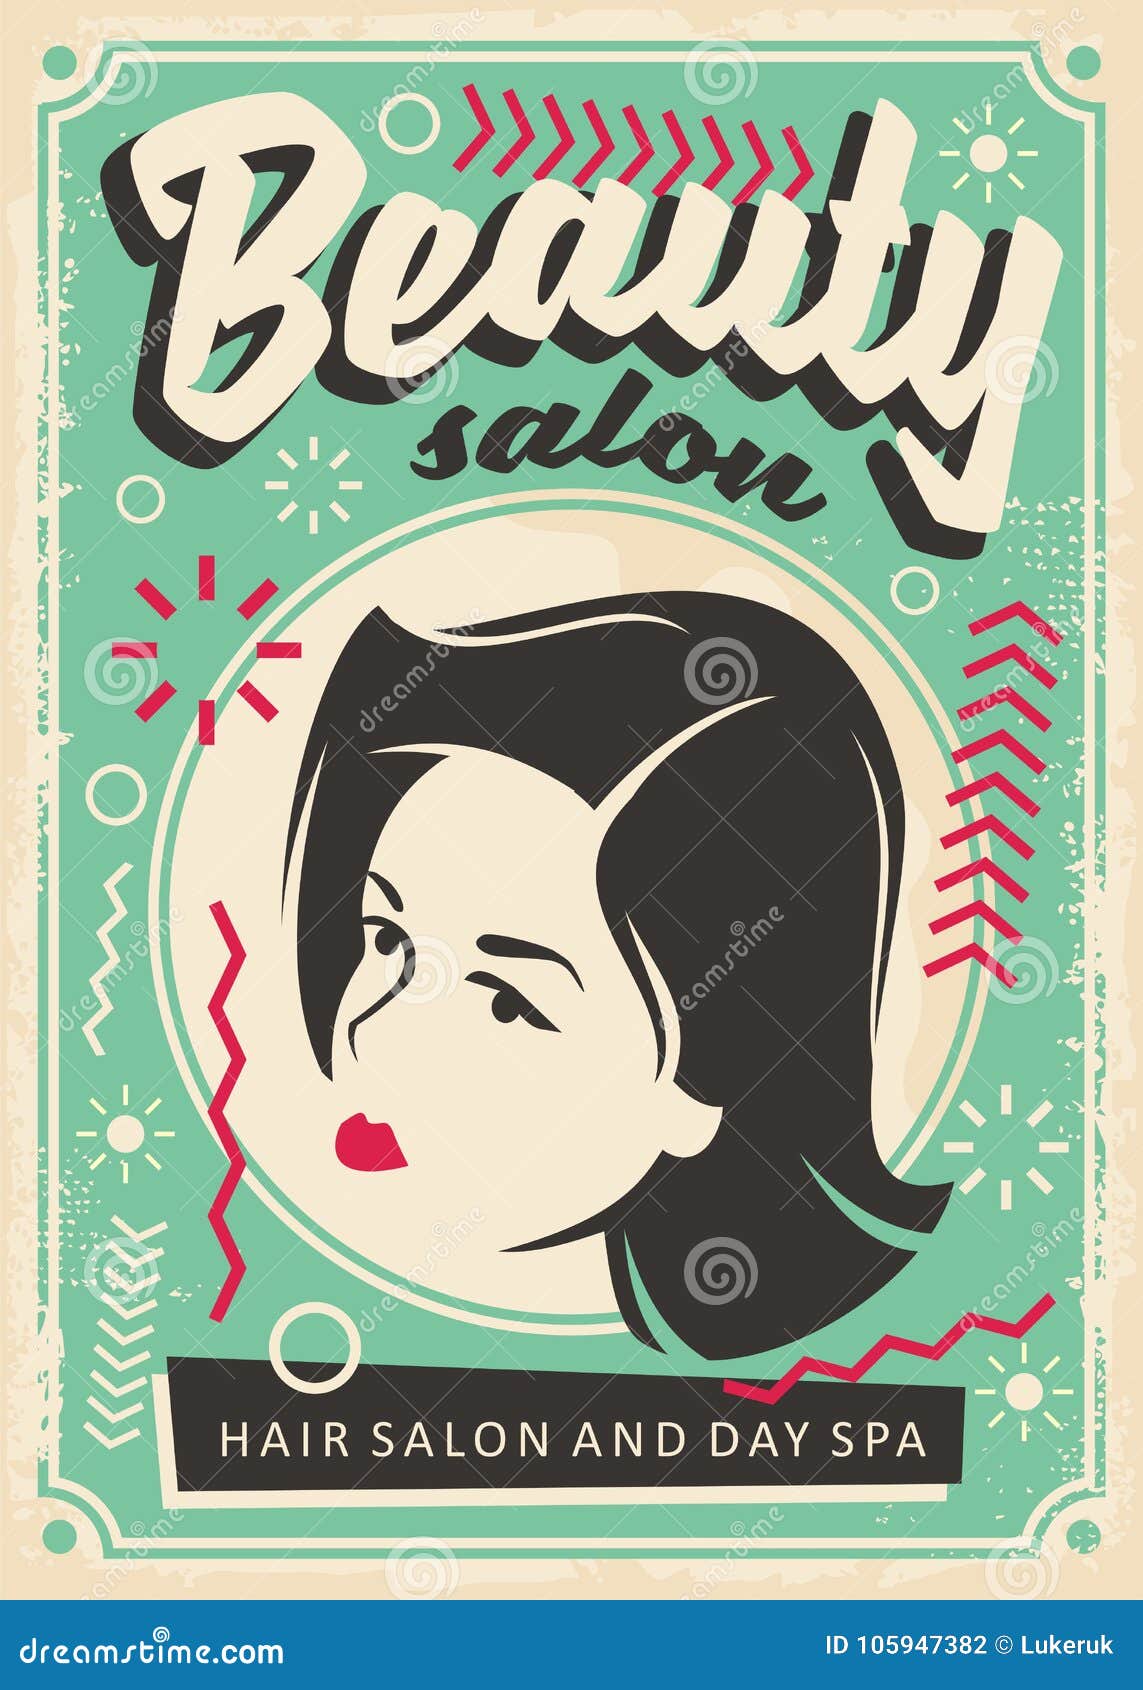 Beauty Salon Retro Poster Design Stock Vector - Illustration of face,  hairstyle: 105947382